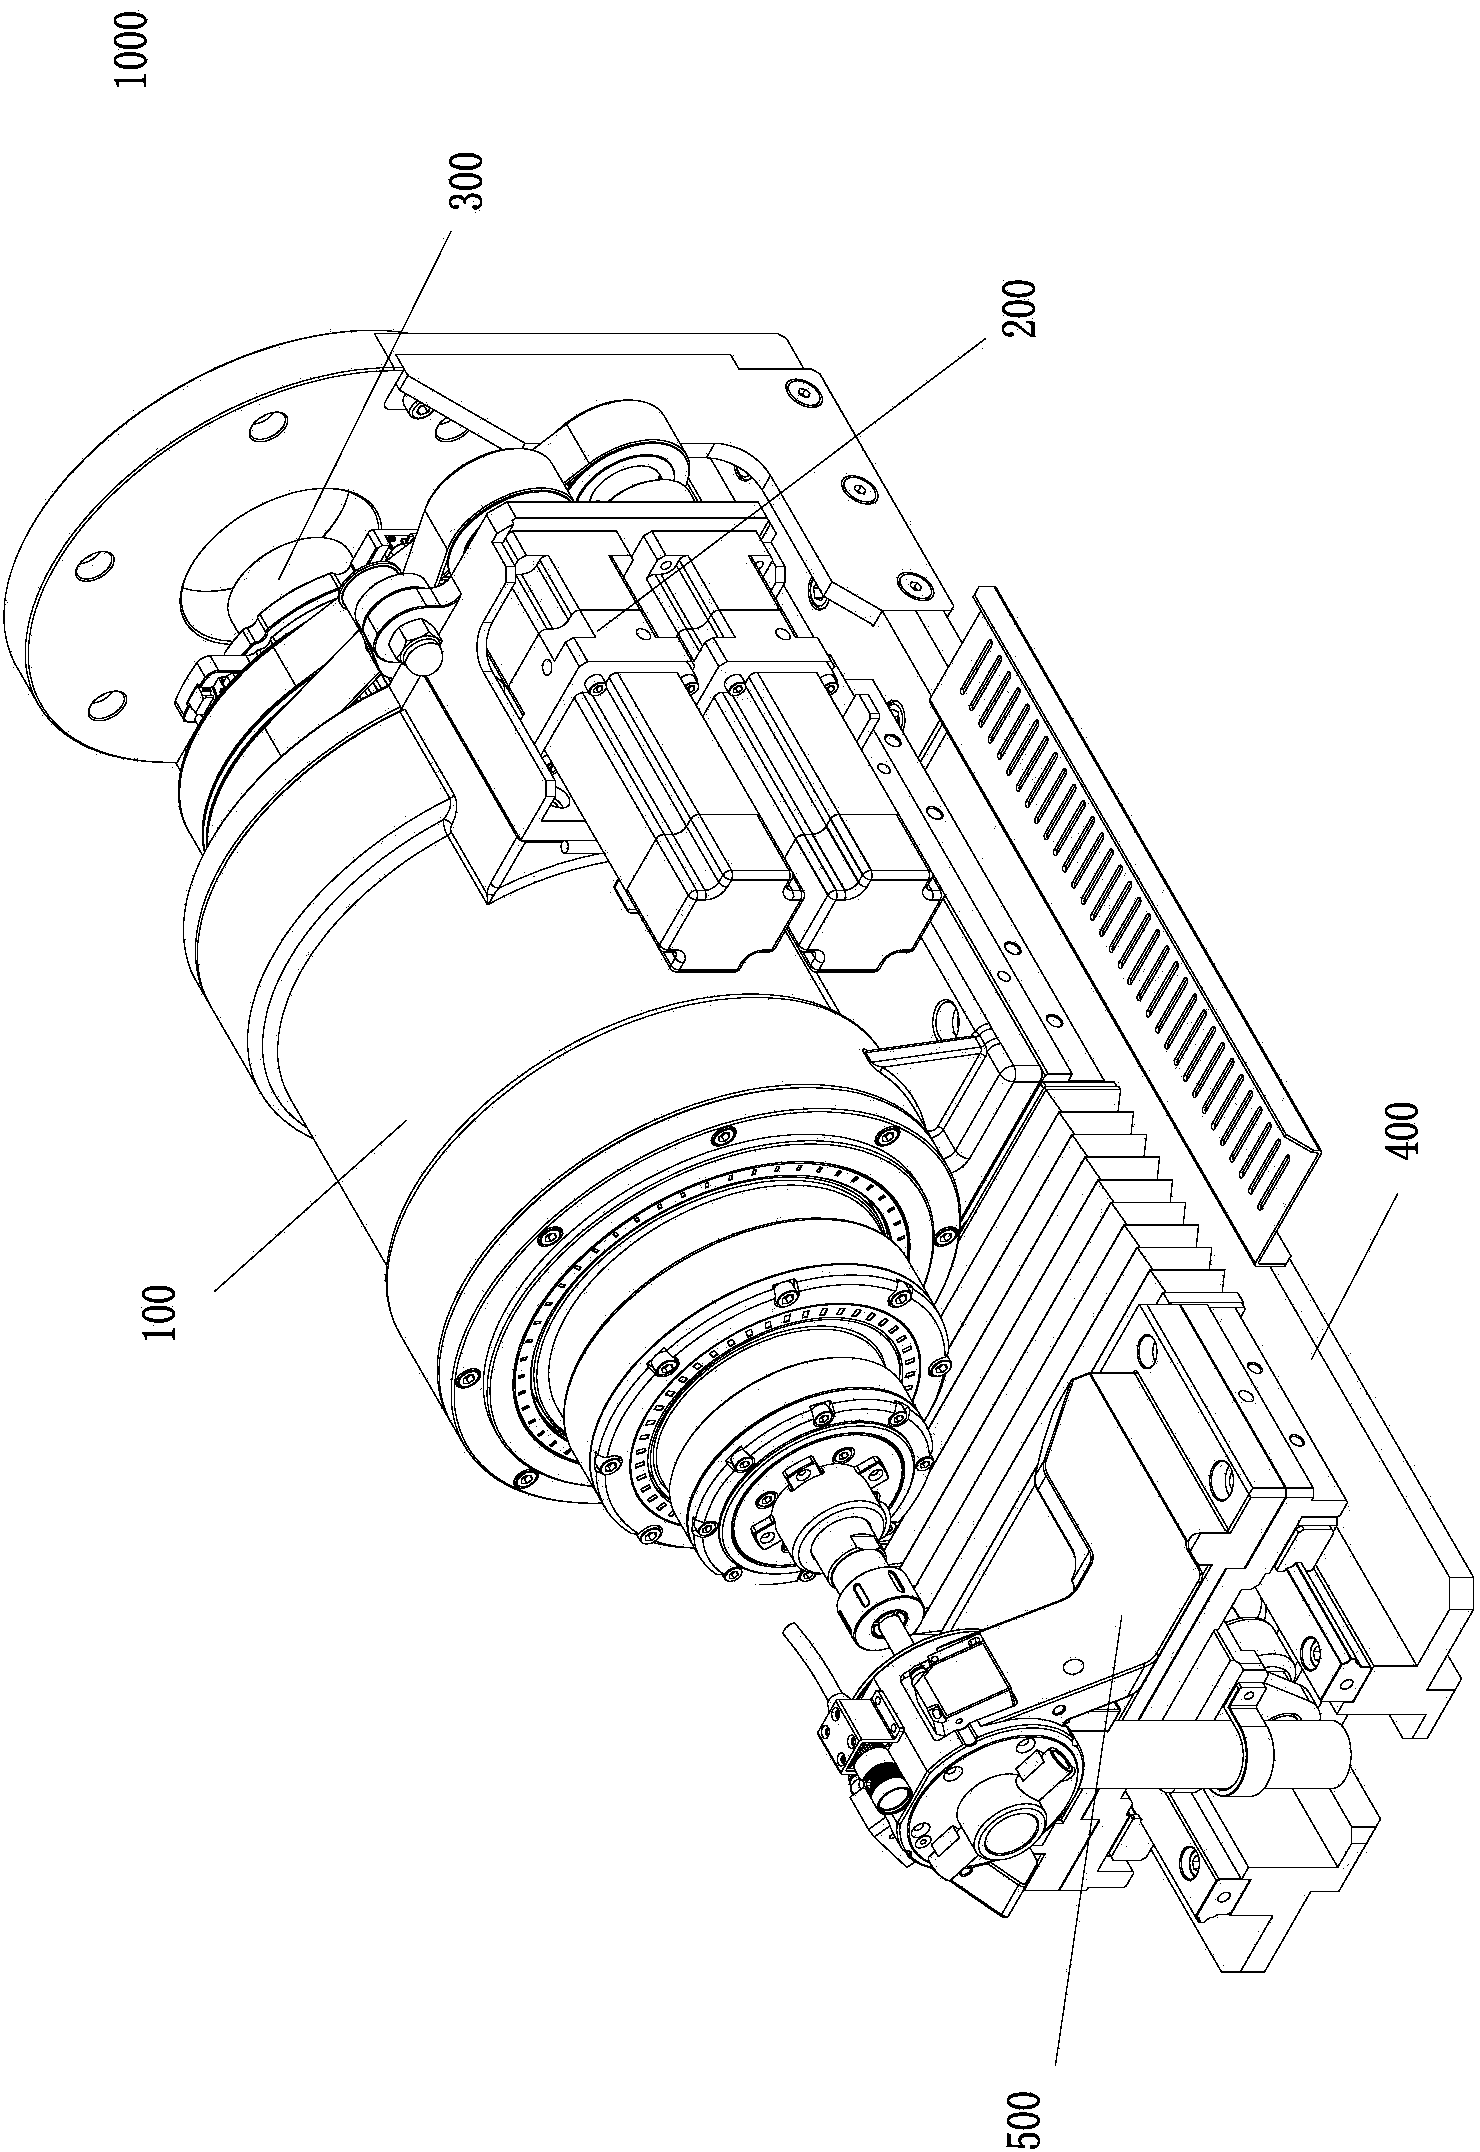 Hole forming device capable of adjusting aperture of formed hole on line